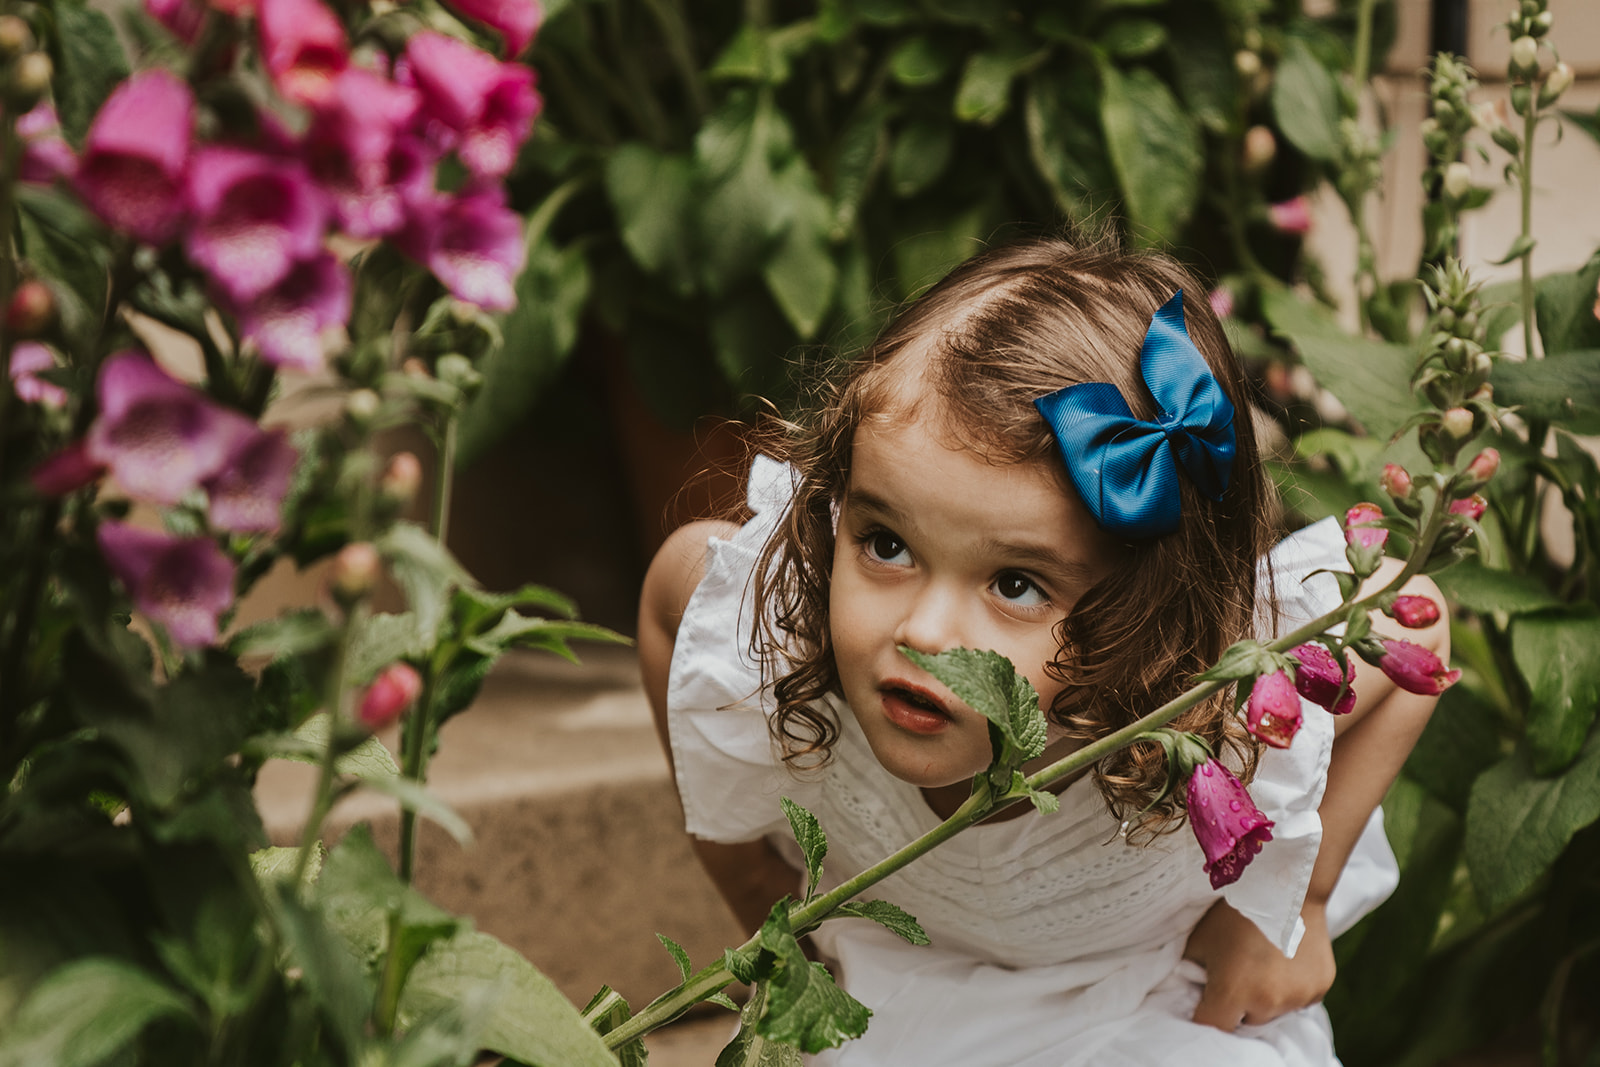 Young girl looking at flowers